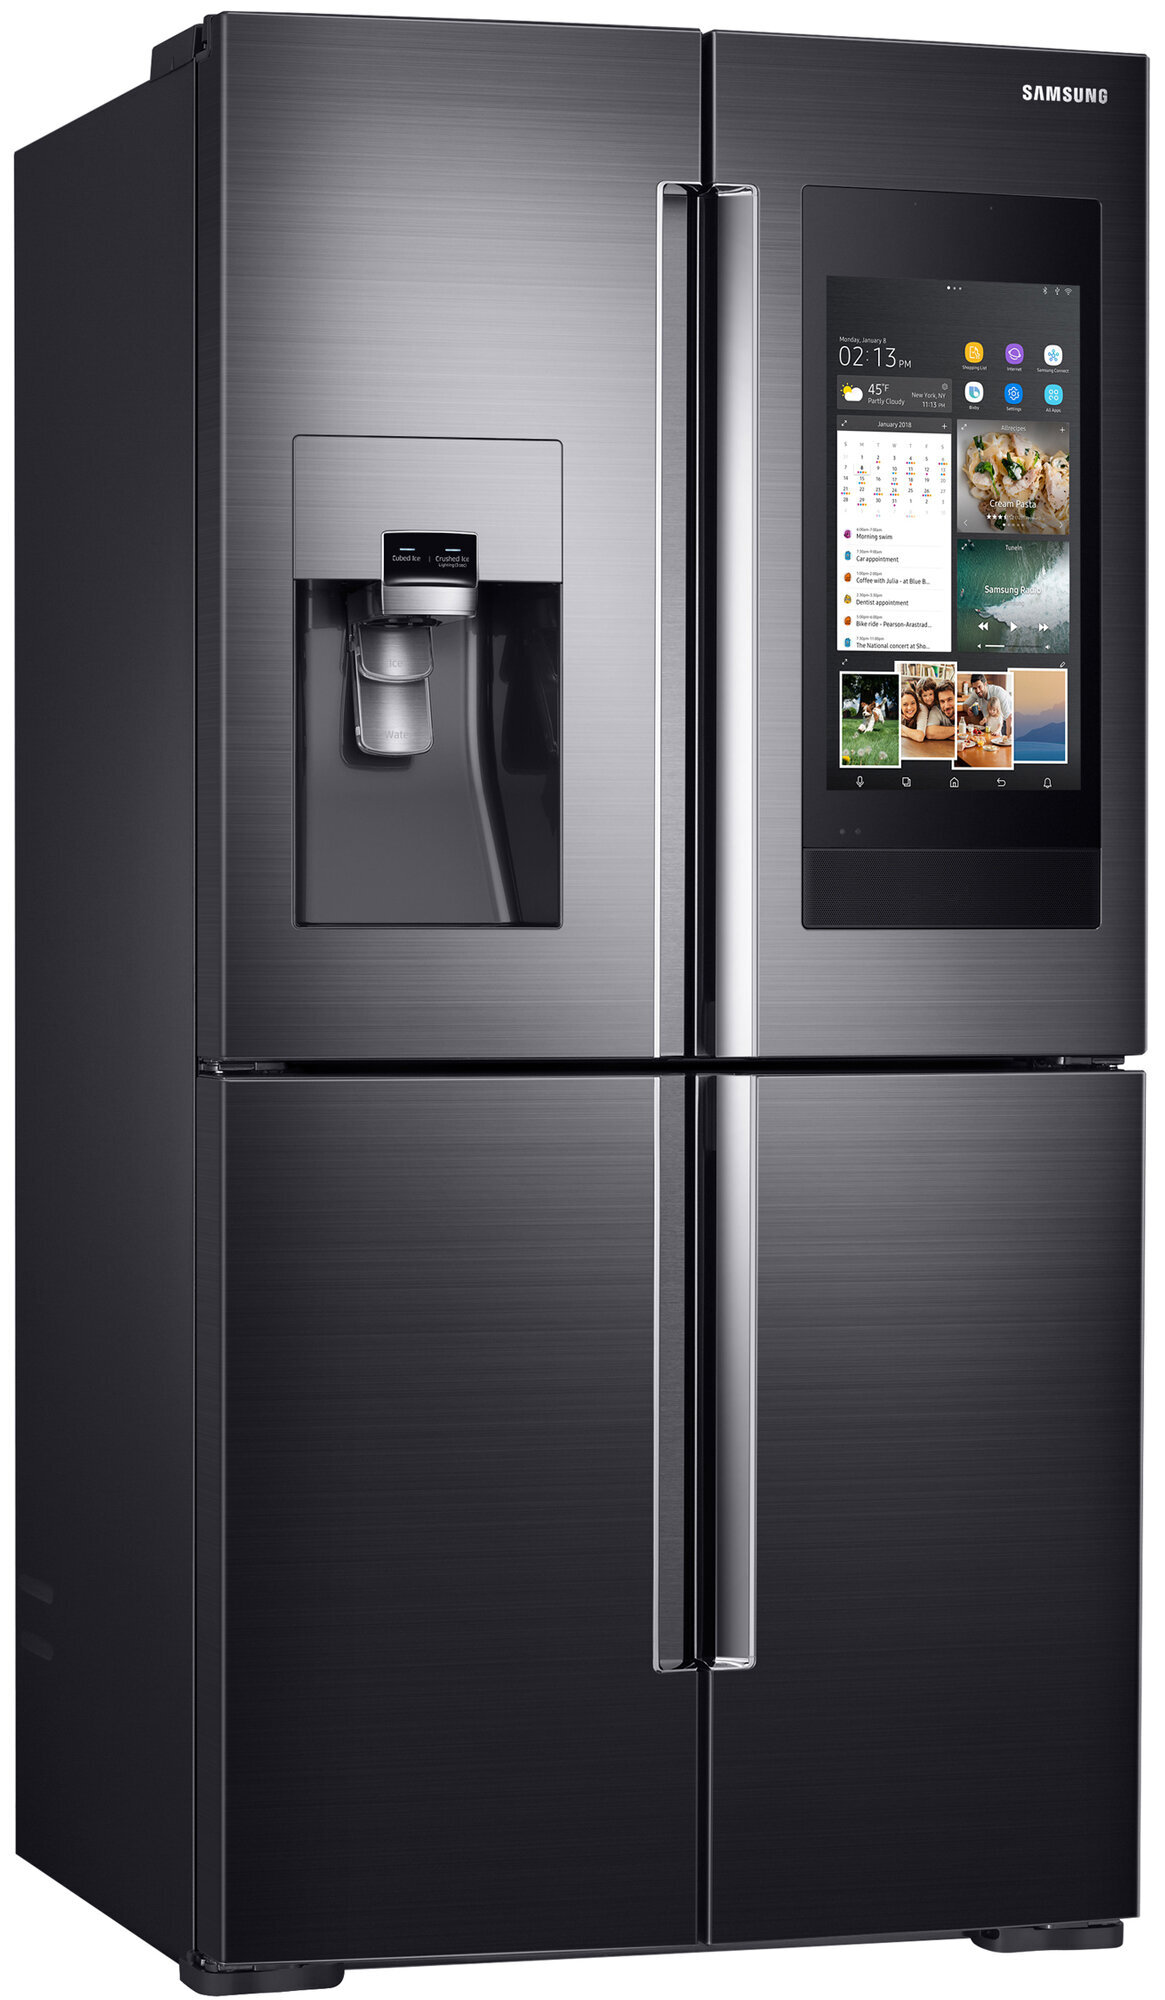 Samsung RF87A9770SG/TL 865 L French Door Refrigerator Price In India ...